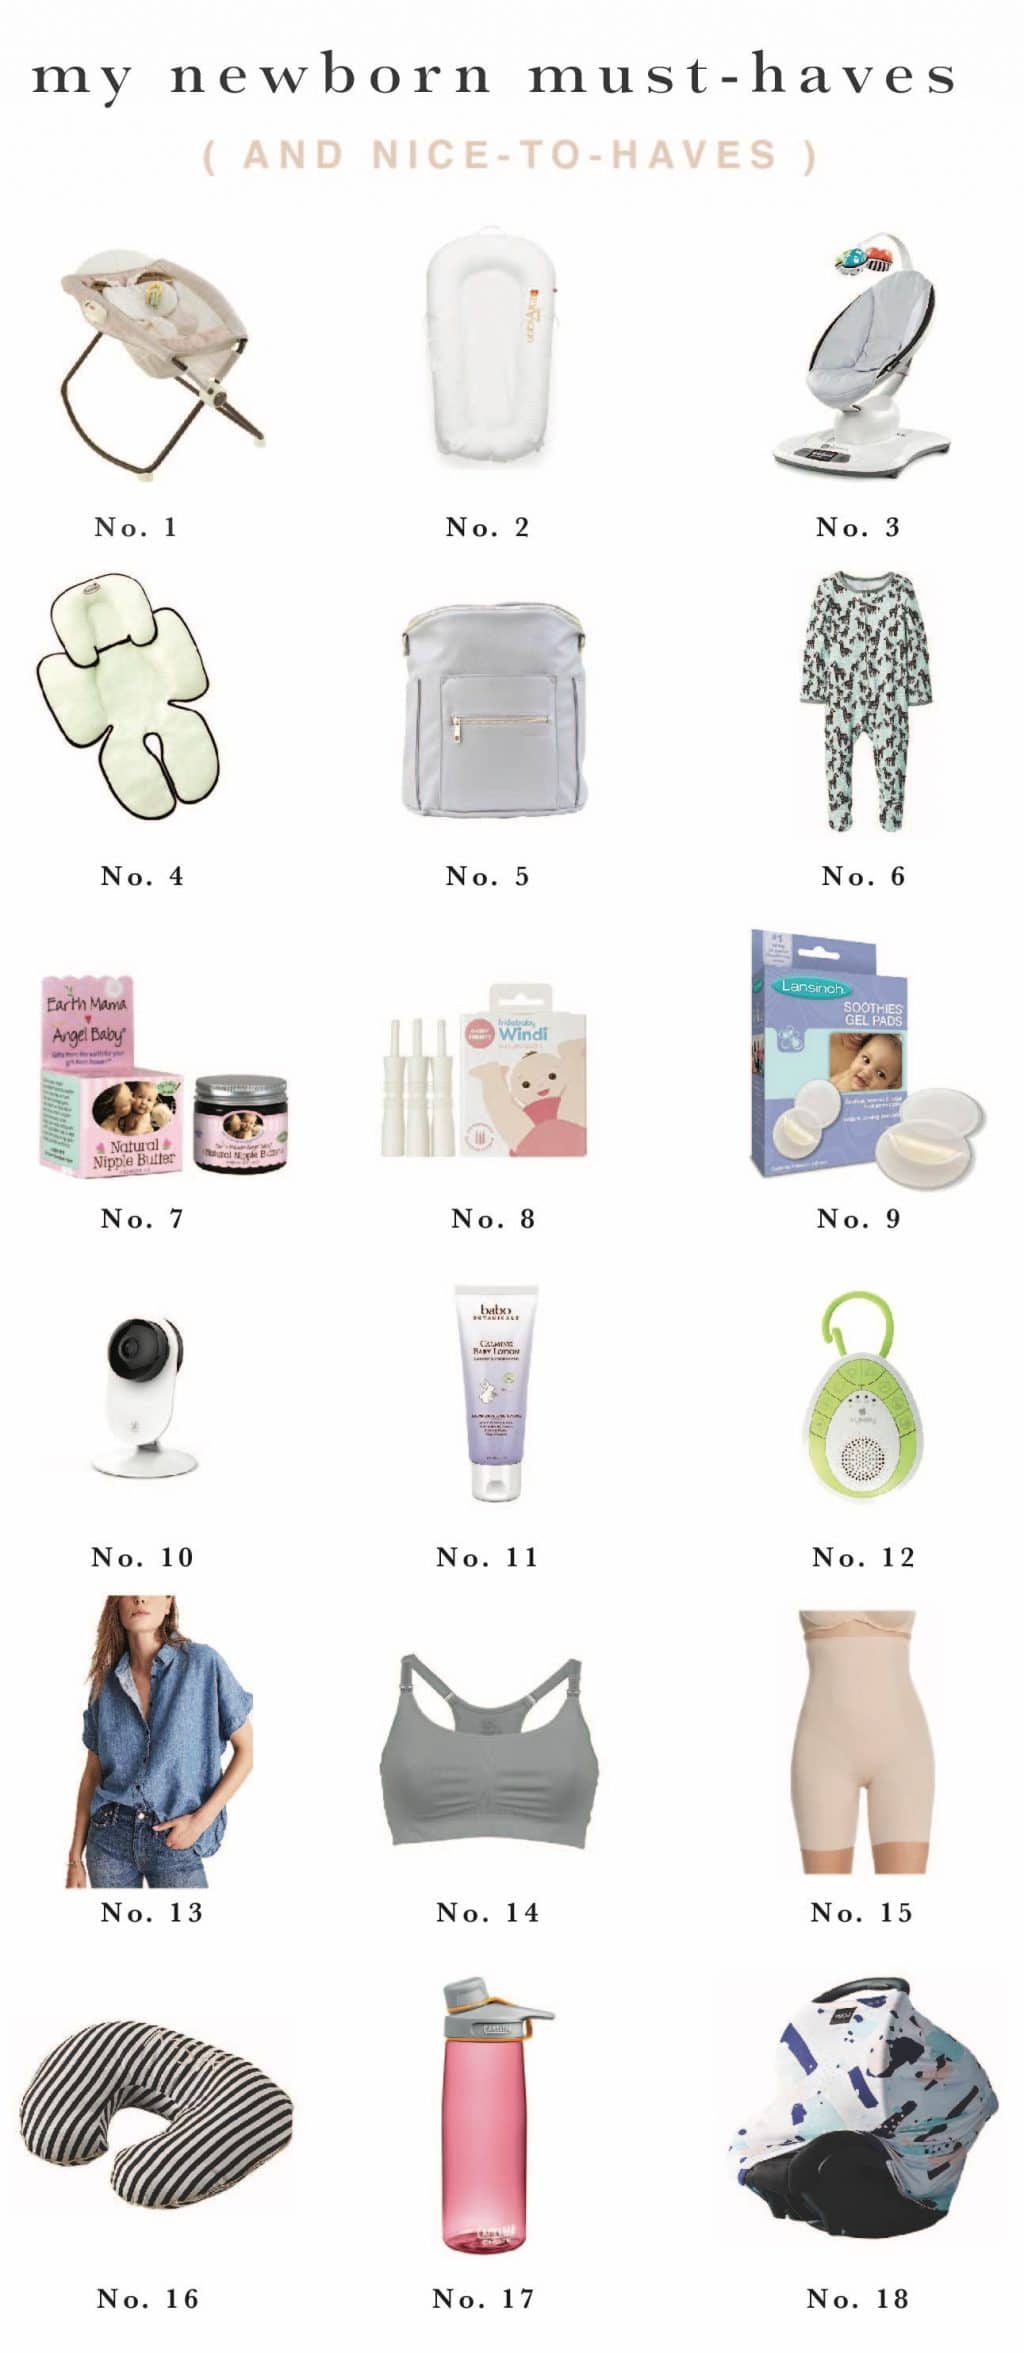 My Newborn Must-Haves ( and nice-to-haves ) - Chris Loves Julia